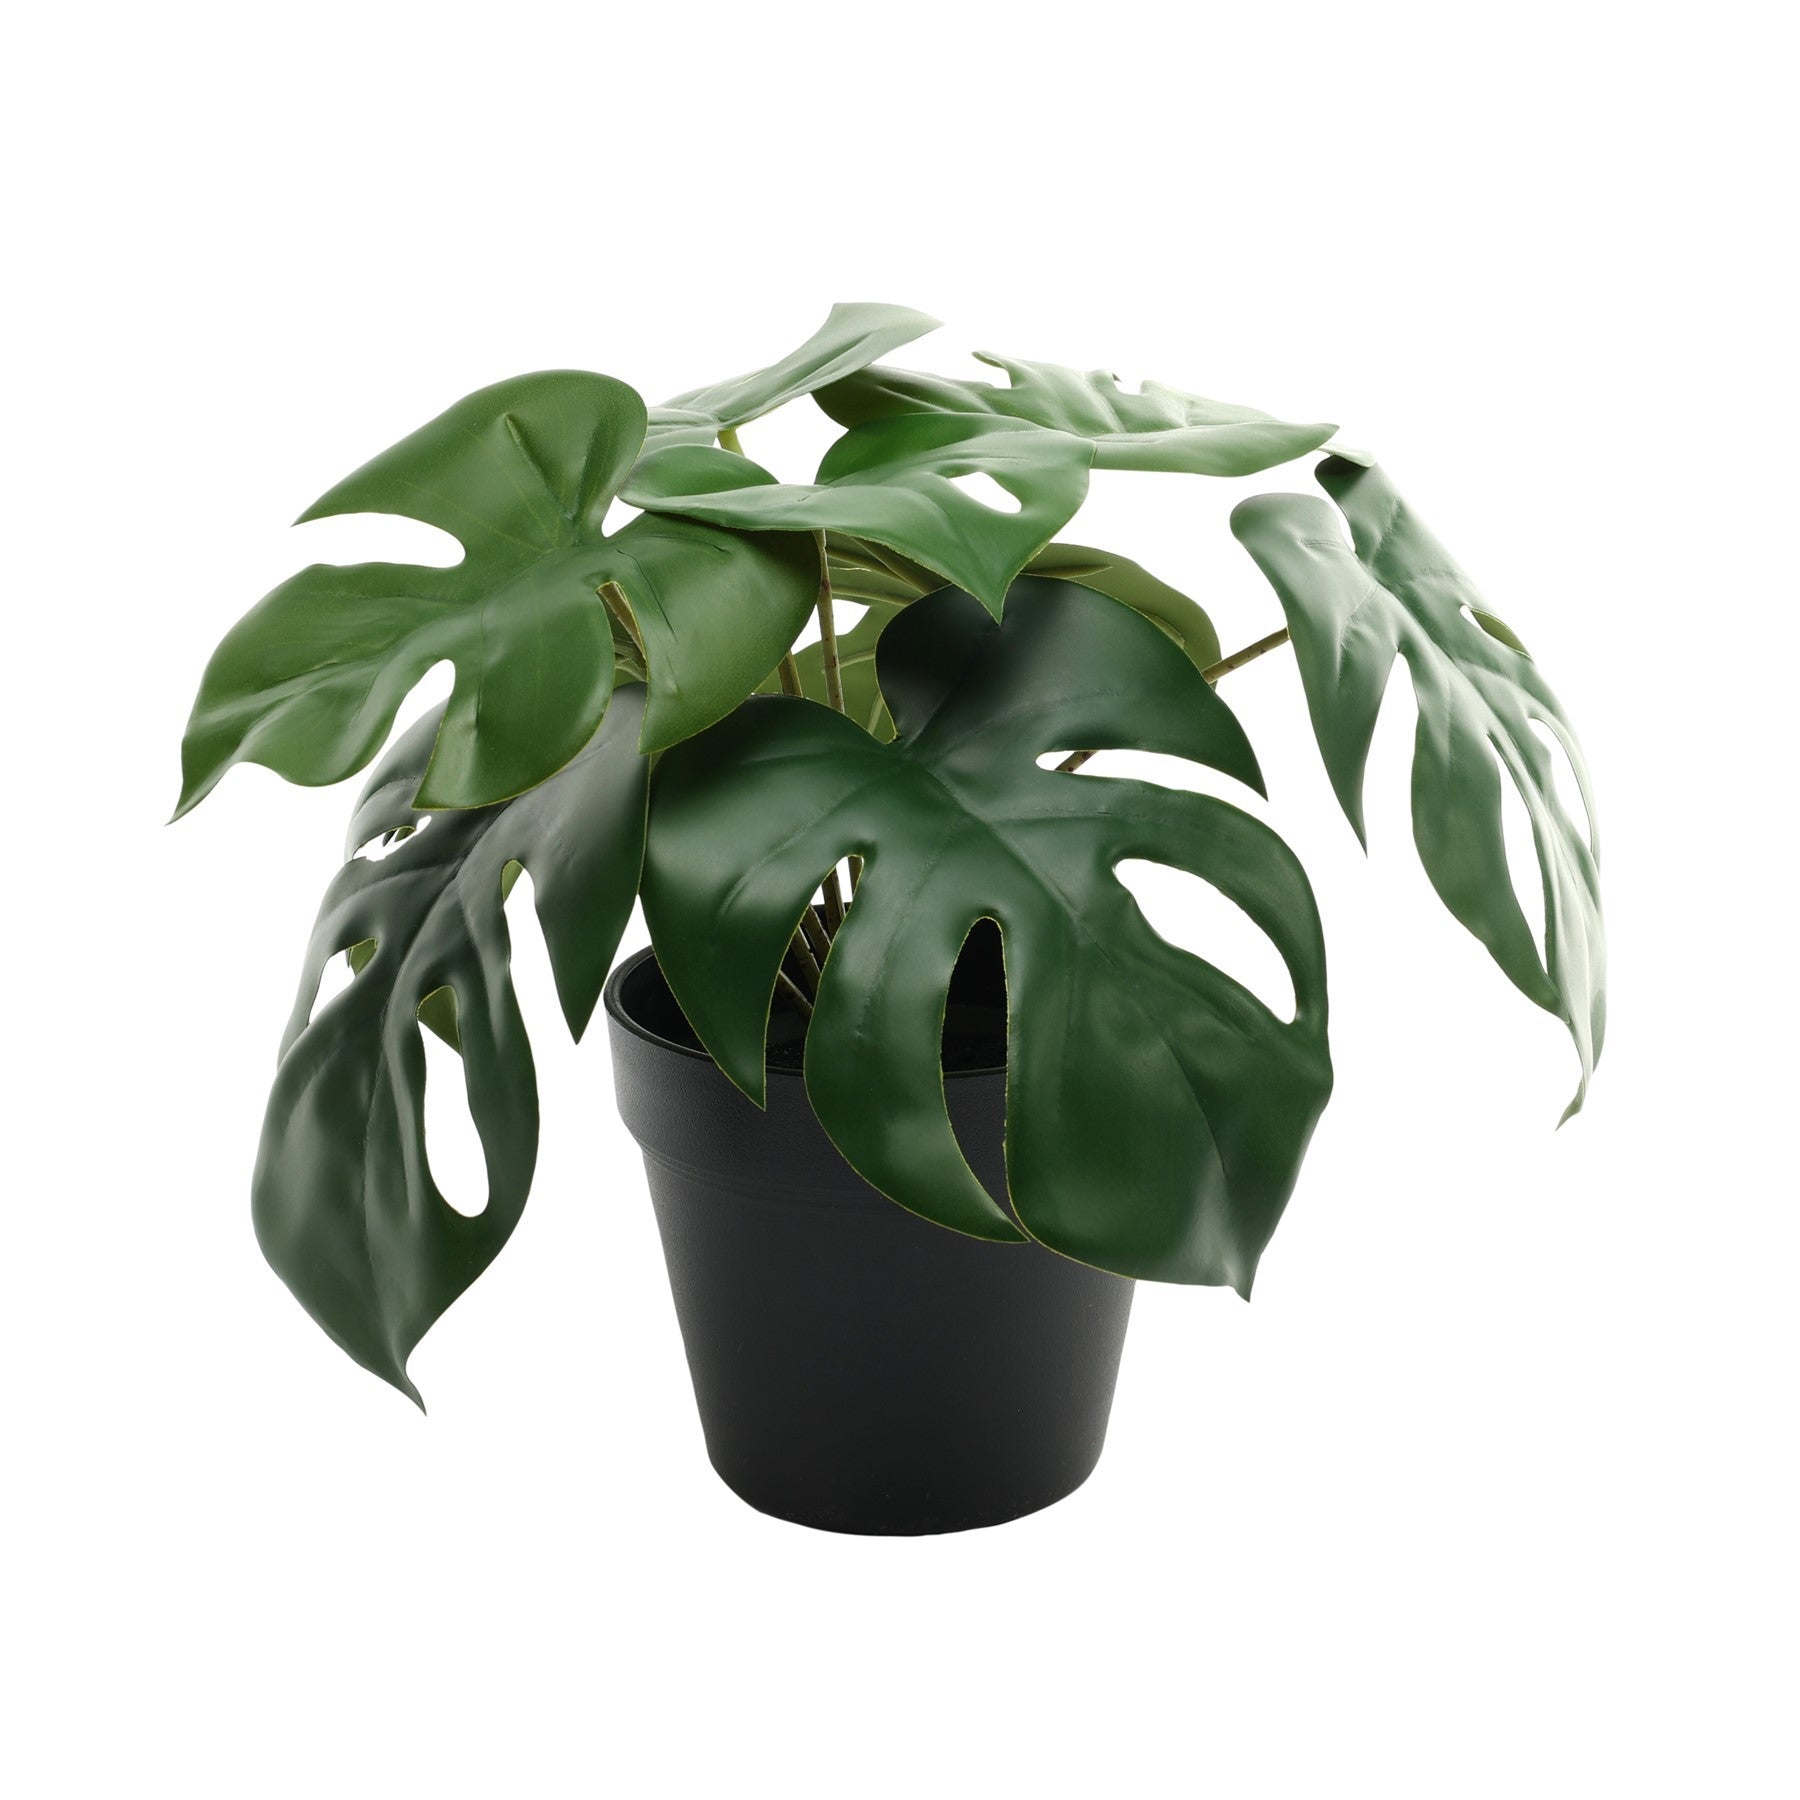 View Monstera Potted Houseplant 23cm information